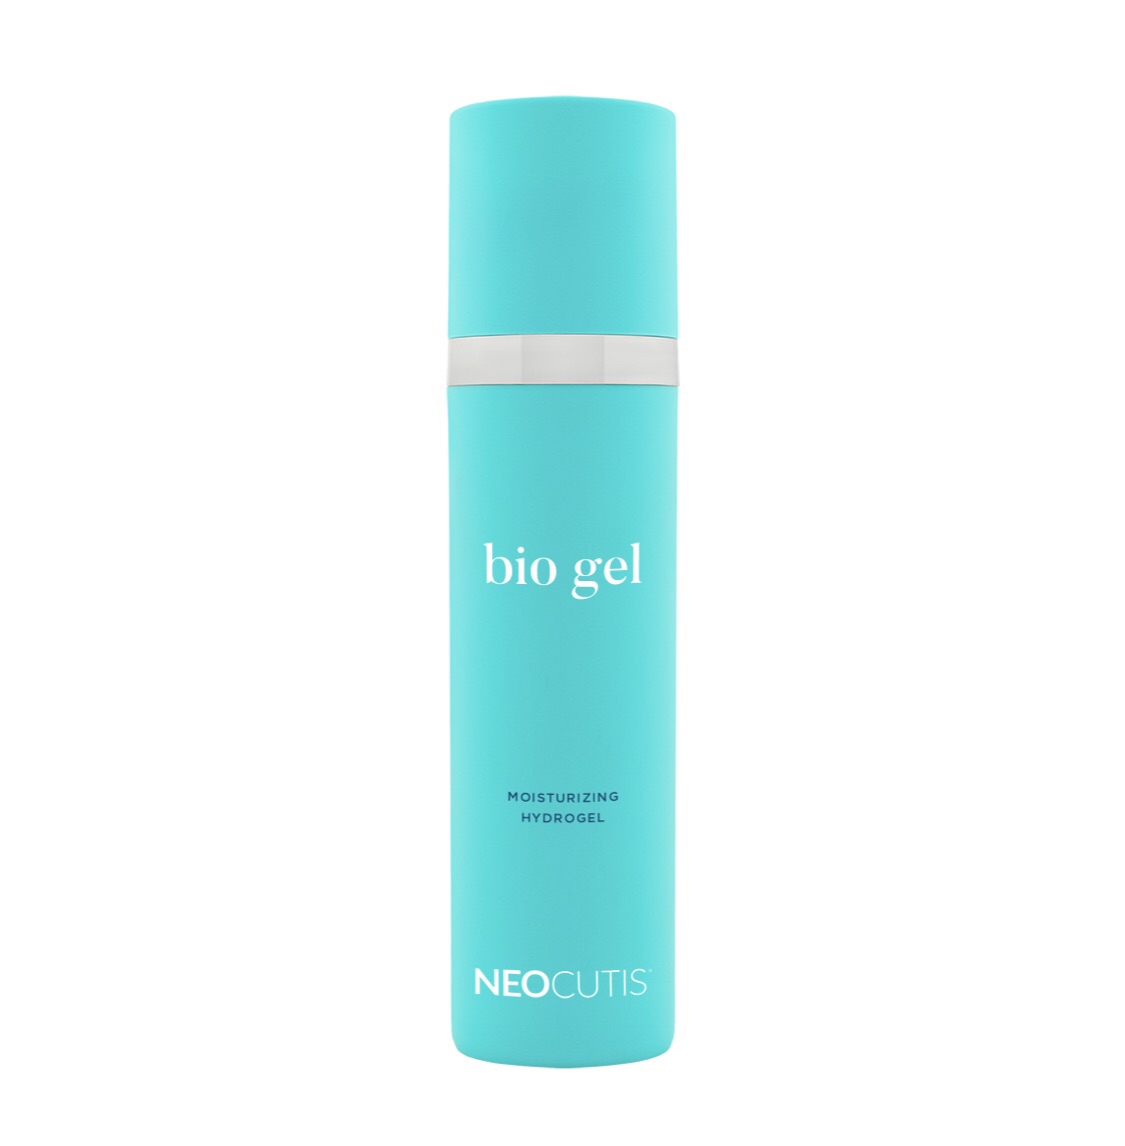 BIO GEL FIRM: Oil-Free Anti-Aging Moisturizer for Fine Lines and Wrinkles